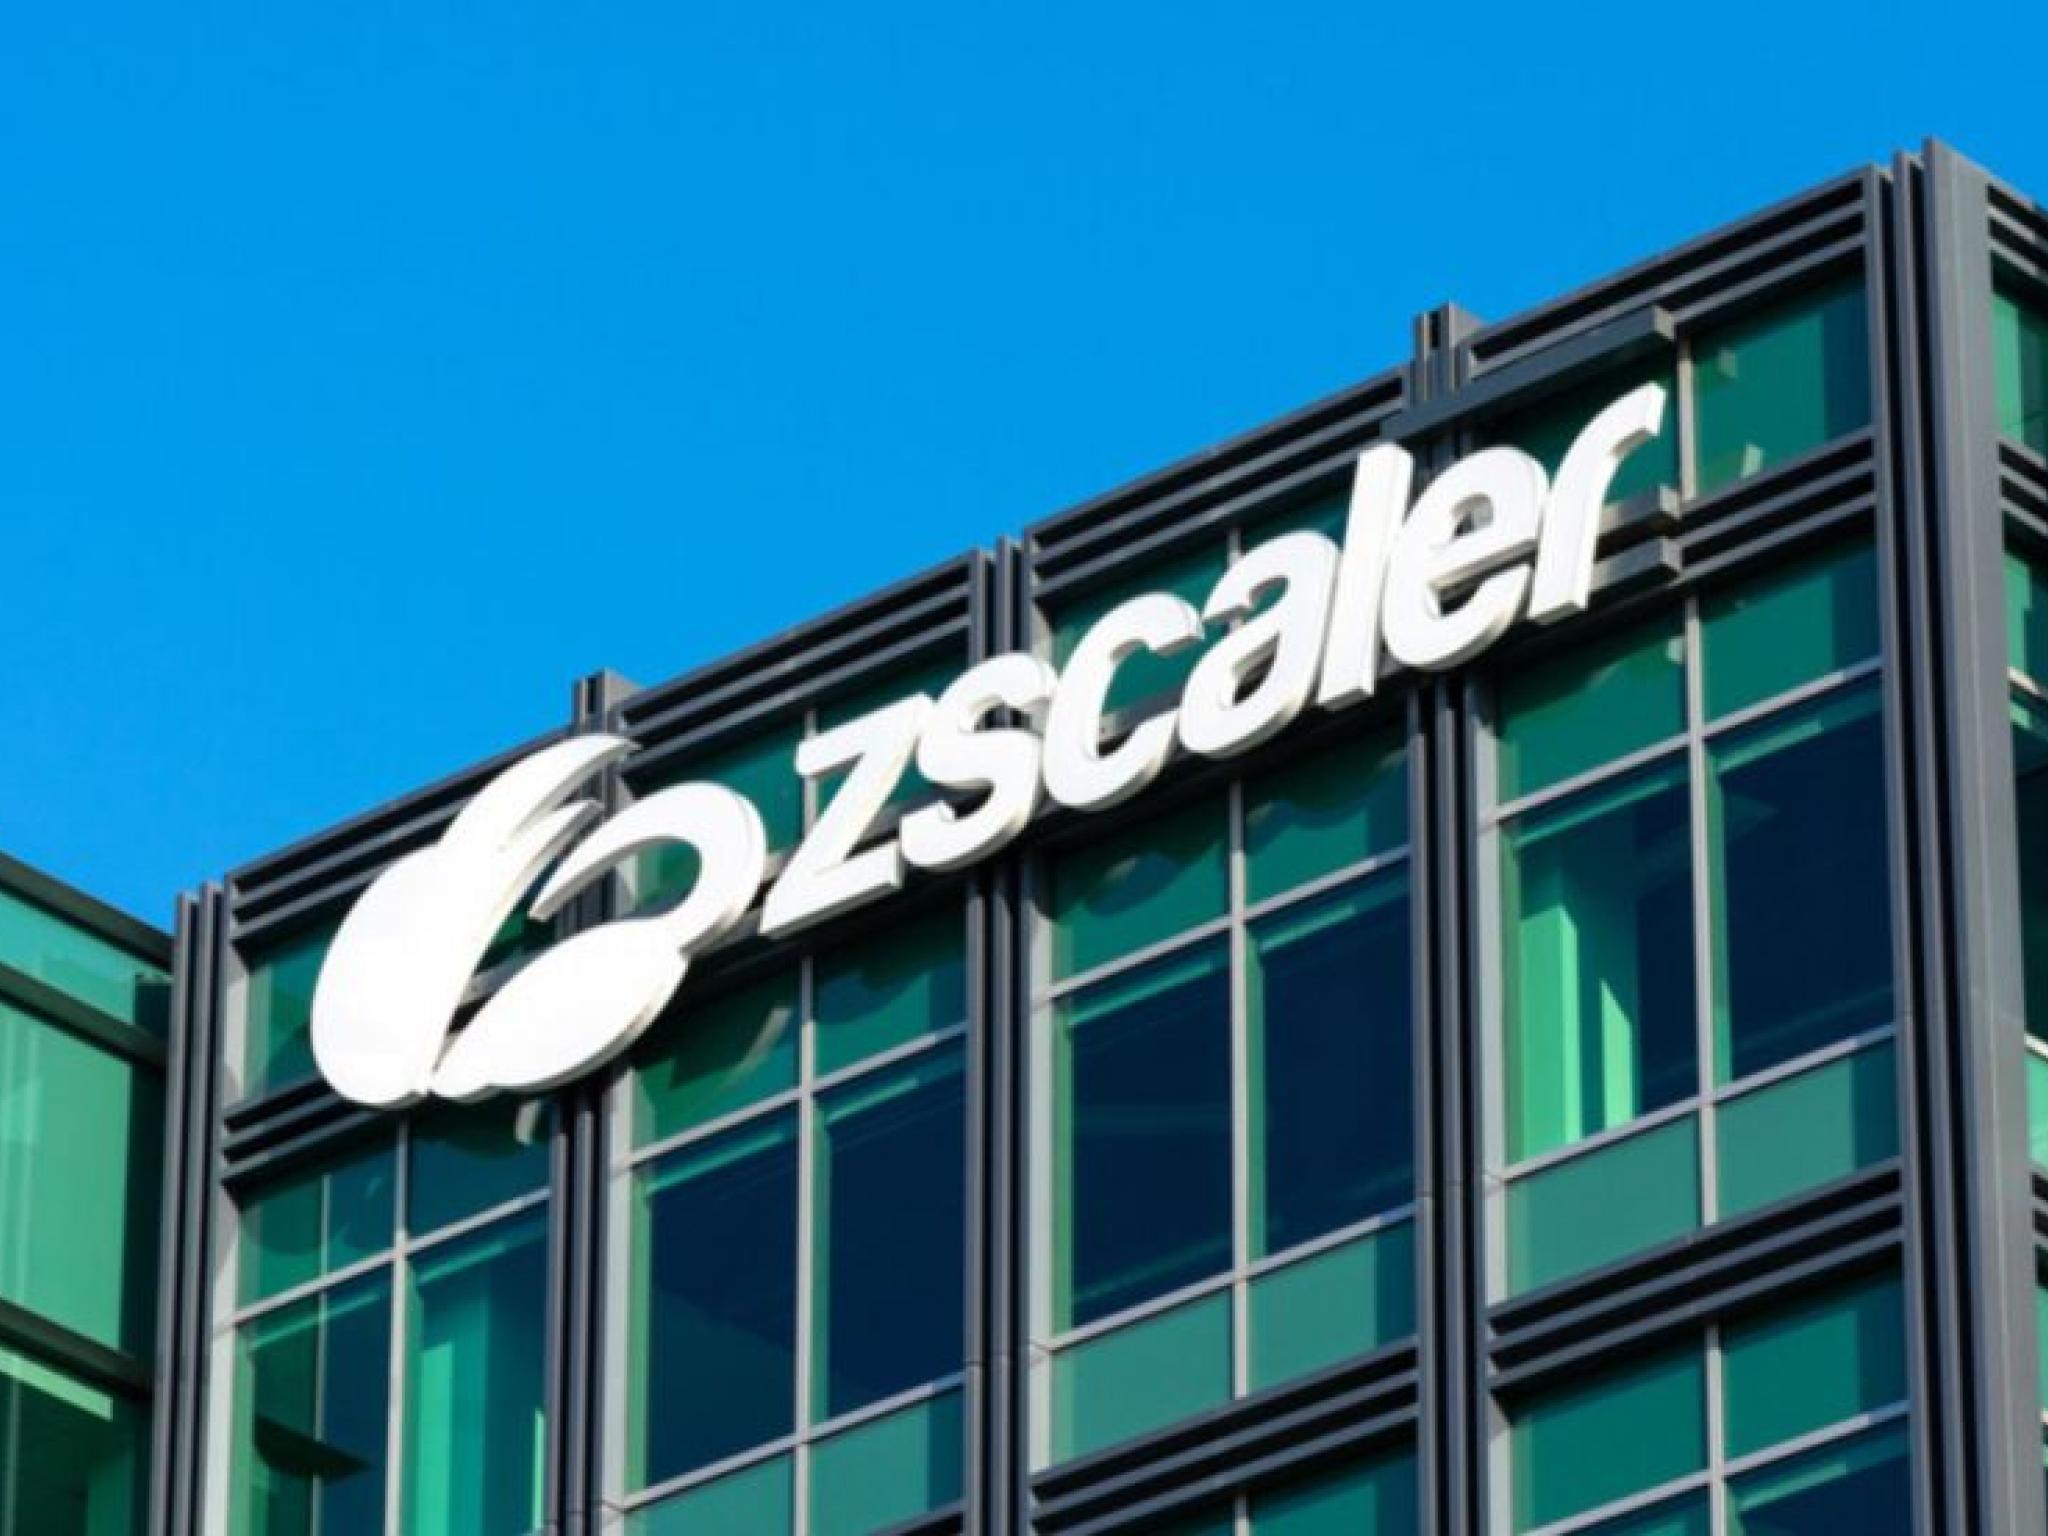  whats-going-on-with-cybersecurity-provider-zscalers-shares-on-tuesday 